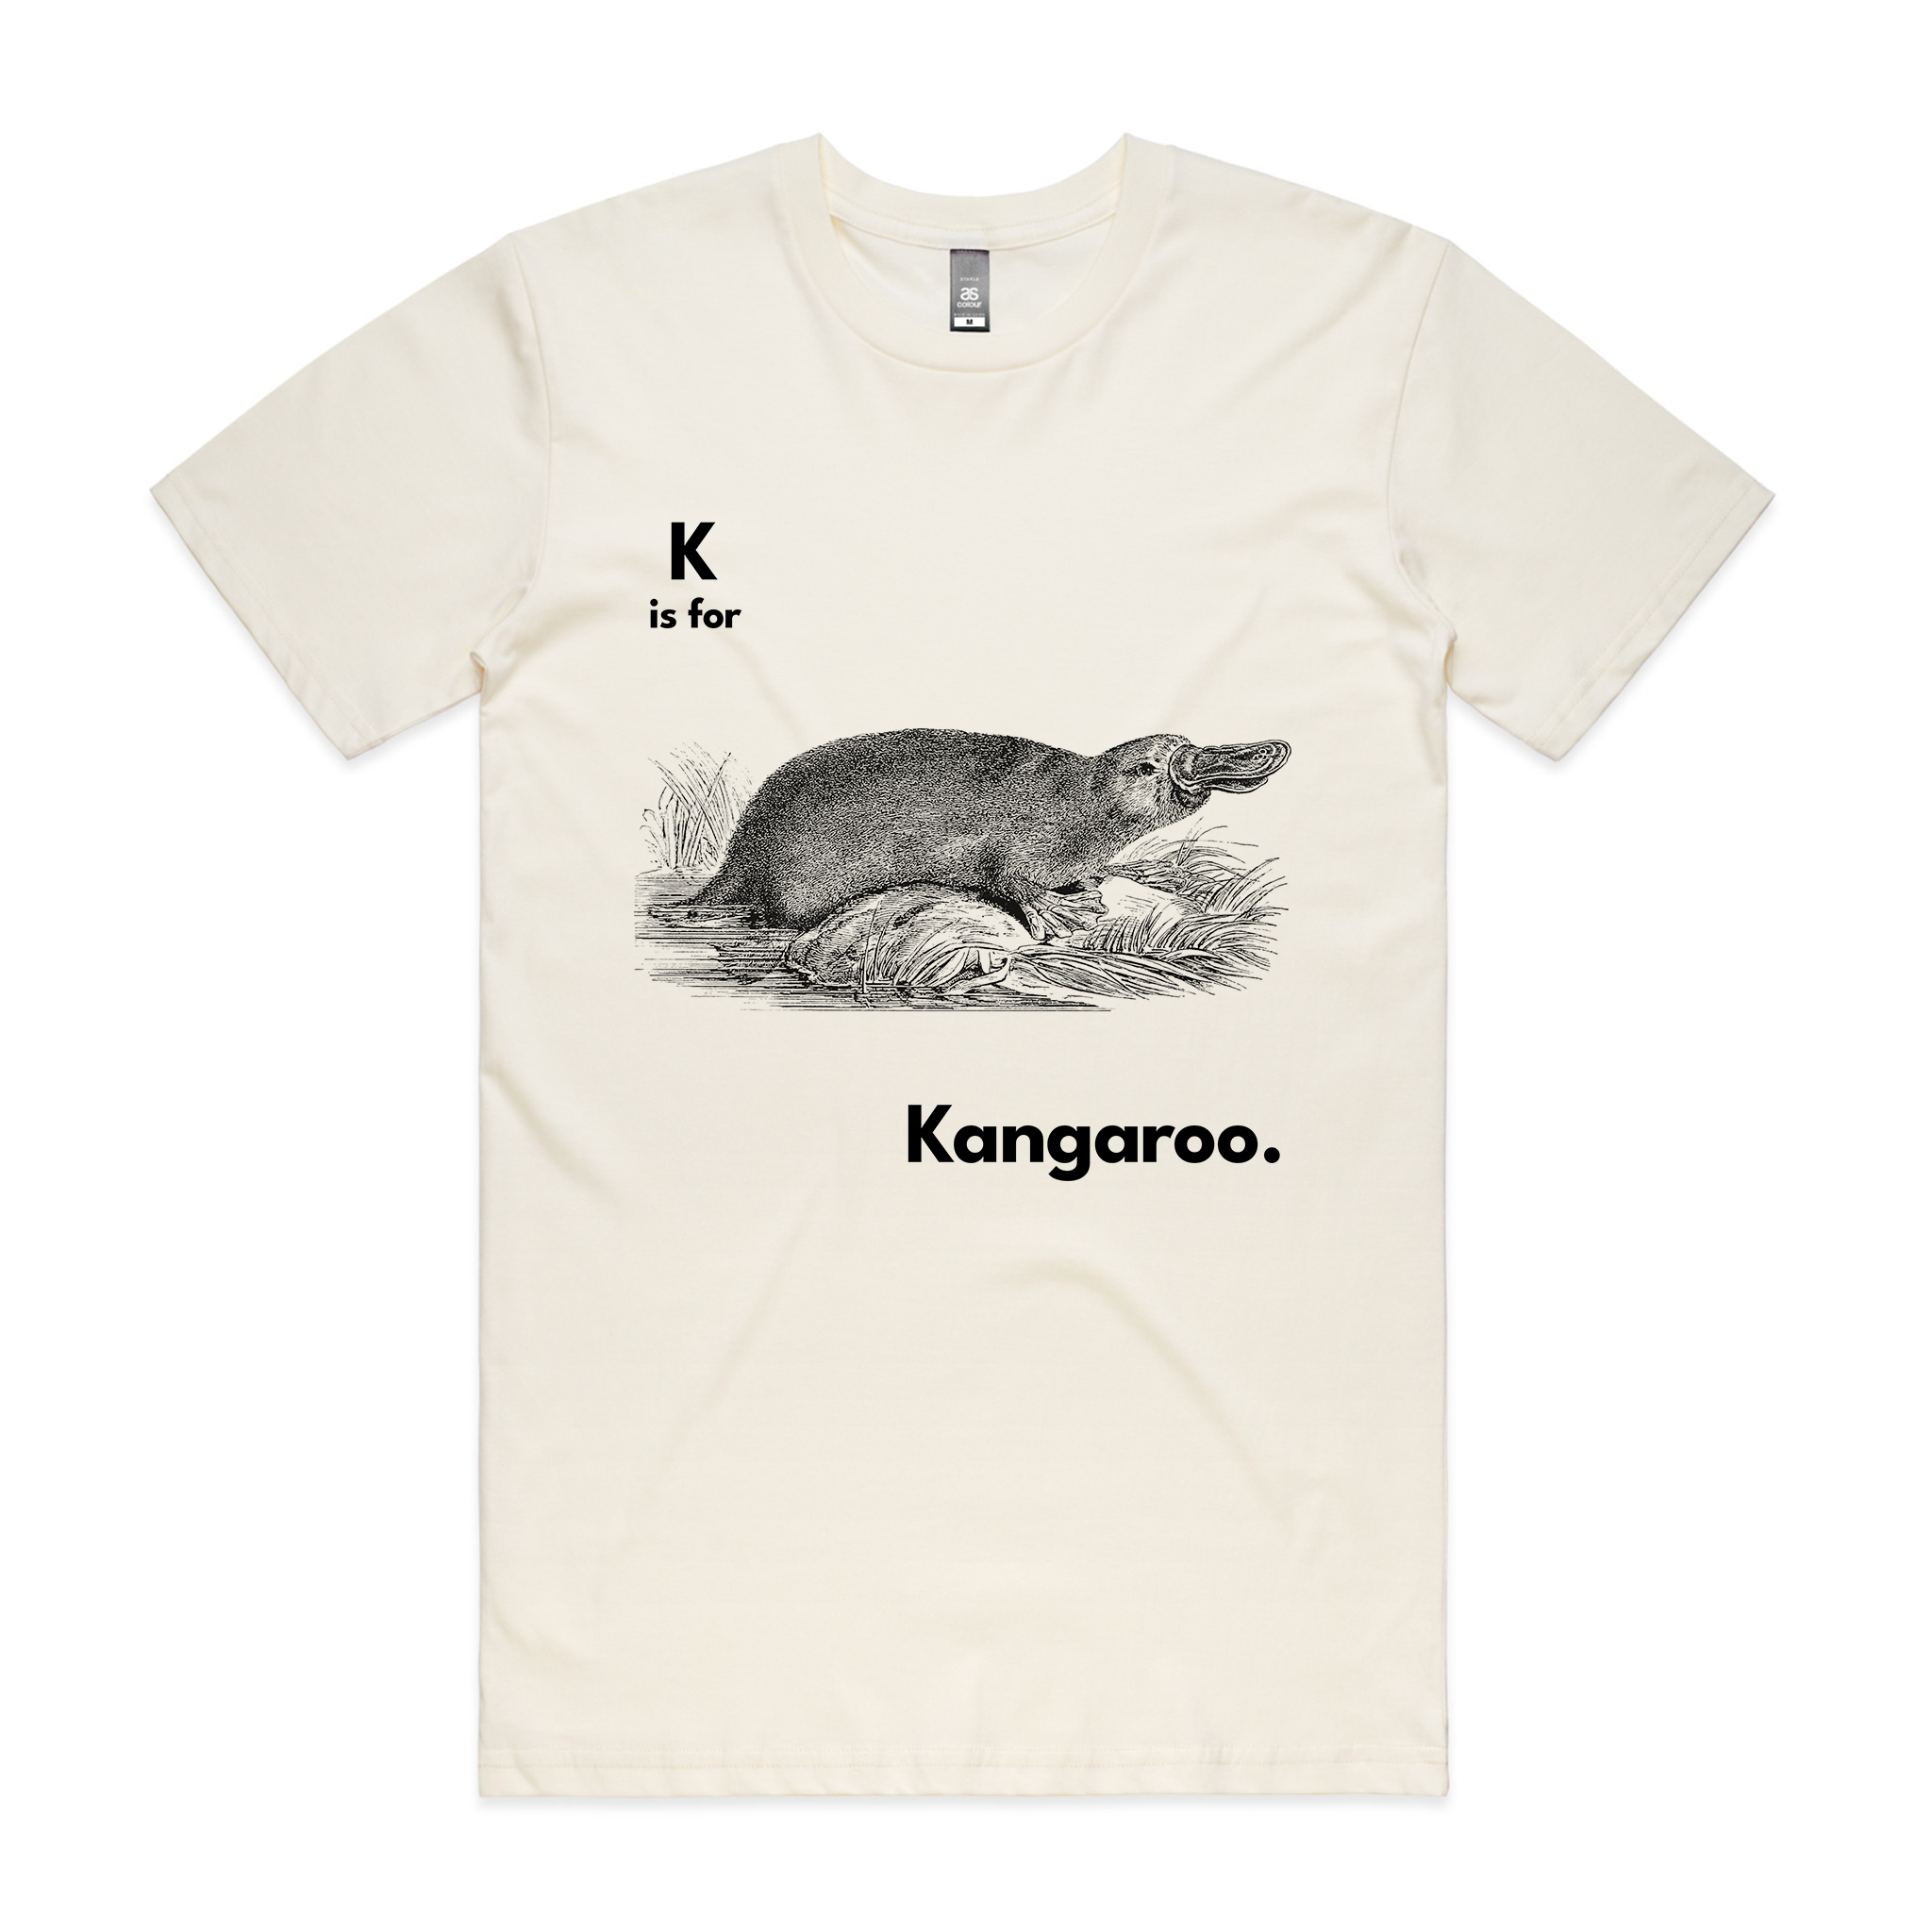 K Is For Kangaroo Tee Ethically Made T-Shirts, Hoodies, Jumpers & More!